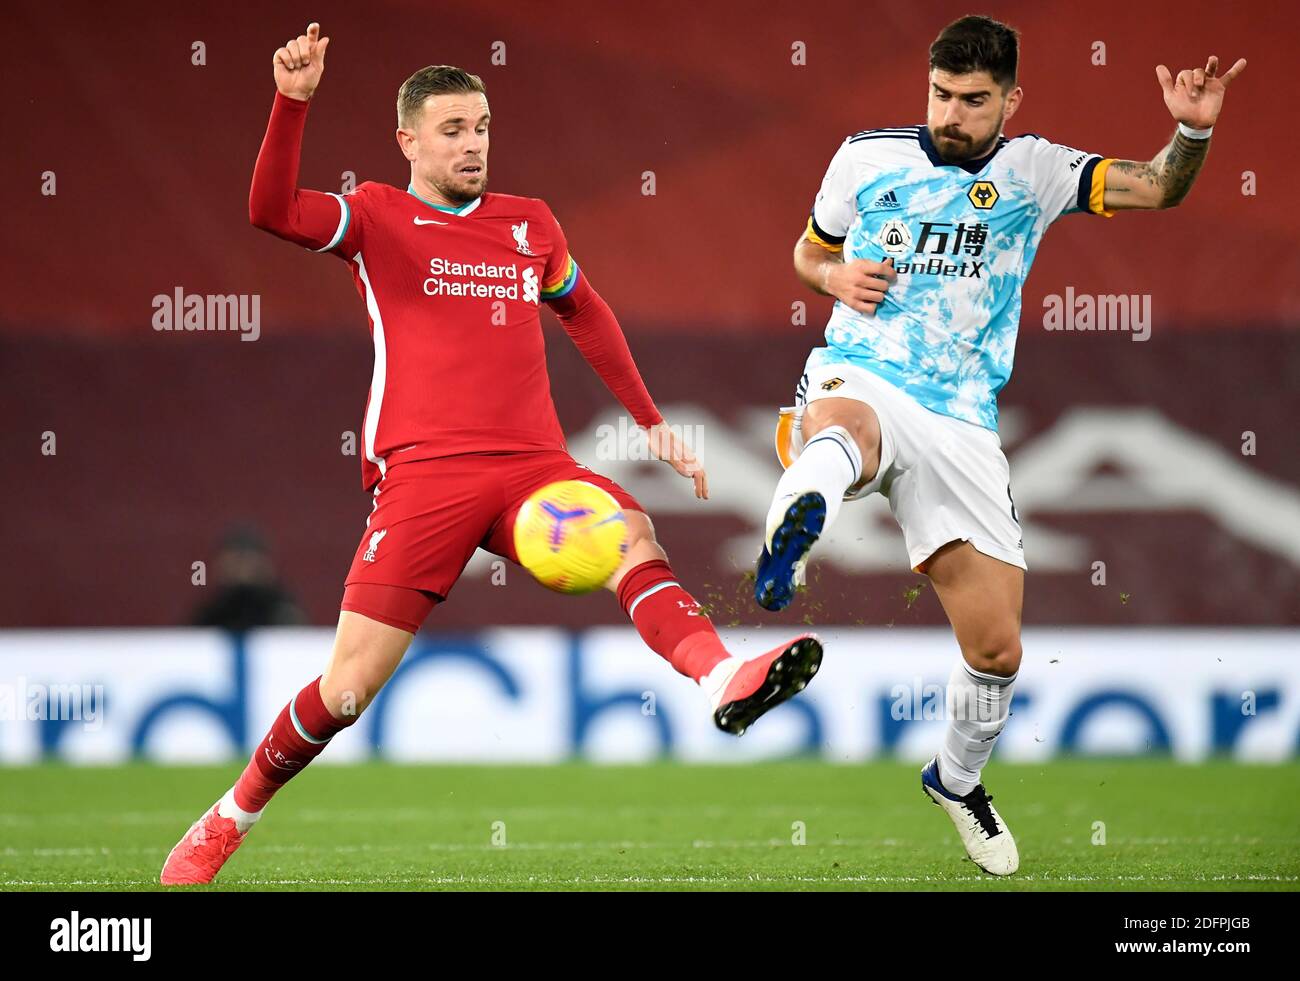 Liverpool's Jordan Henderson (left) and Wolverhampton Wanderers' Ruben Neves  battle for the ball during the Premier League match at Anfield, Liverpool  Stock Photo - Alamy